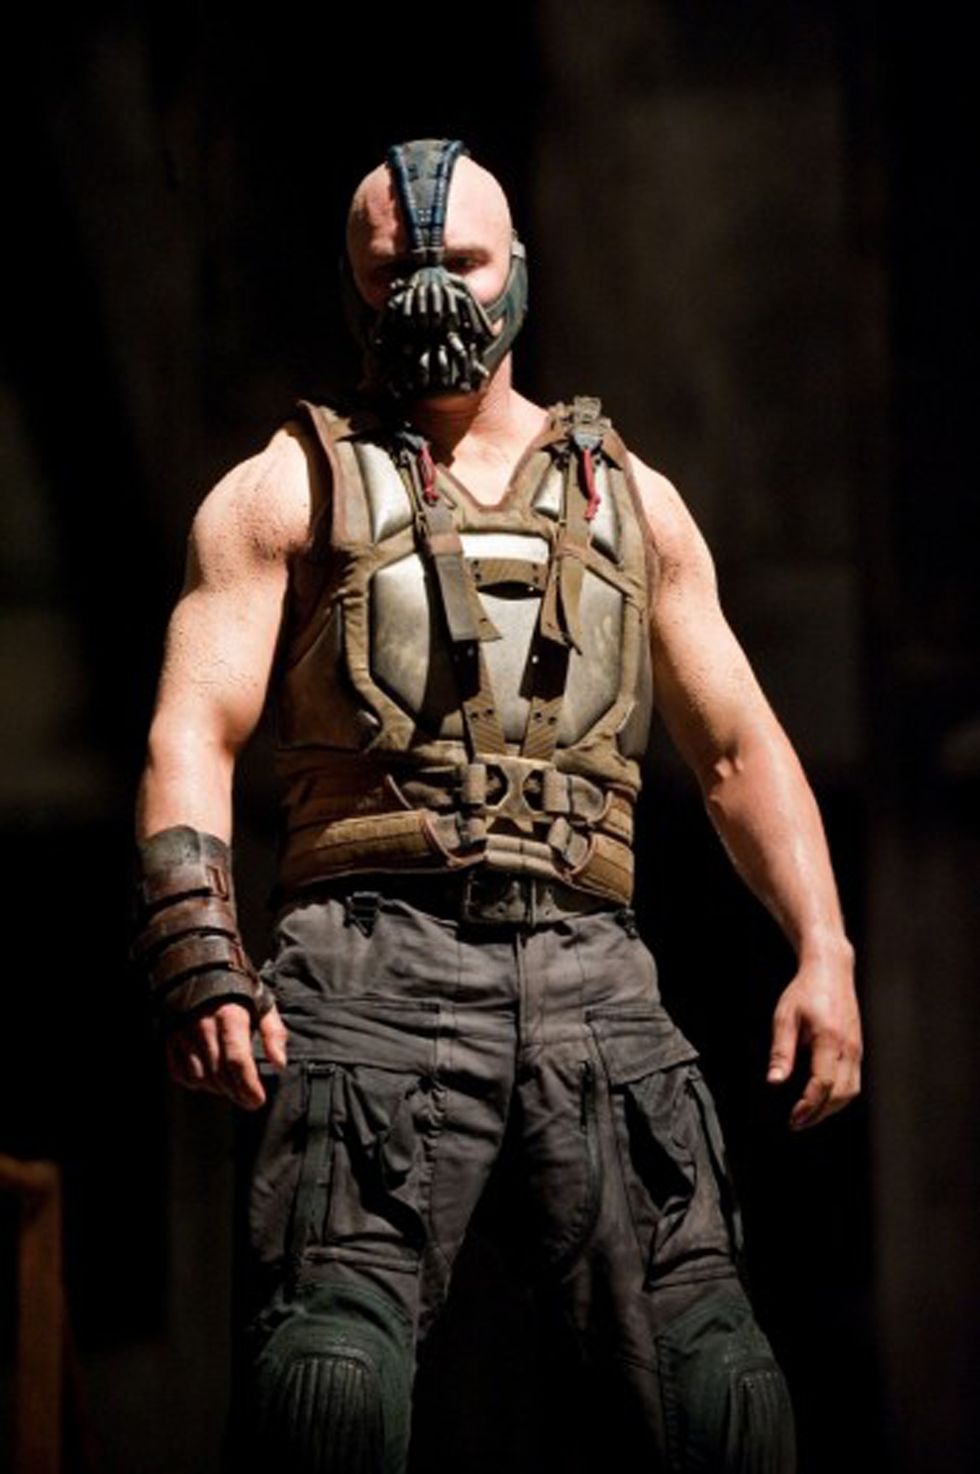 editorial use only no book cover usage
mandatory credit photo by moviestoreshutterstock 1539997e
the dark knight rises   tom hardy as bane
the dark knight rises   2012